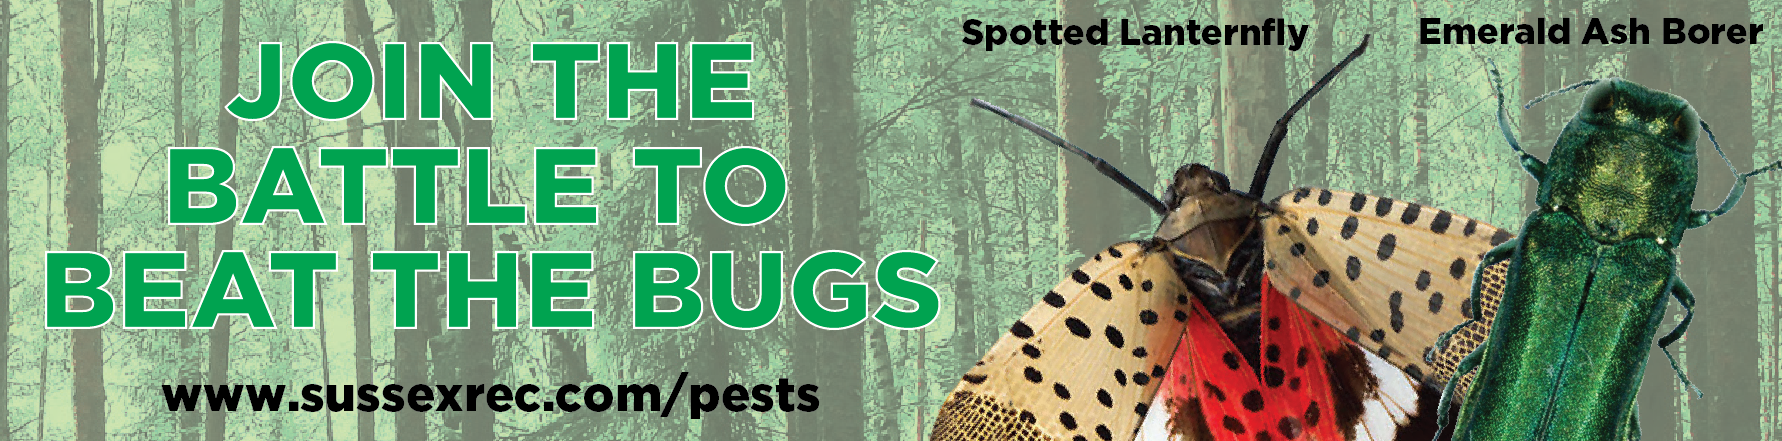 Image of a forest background with a spotted lanternfly and emerald ash borer in the foreground. Text reads: "JOIN THE BATTLE TO BEAT THE BUGS - www.sussexrec.com/pests"